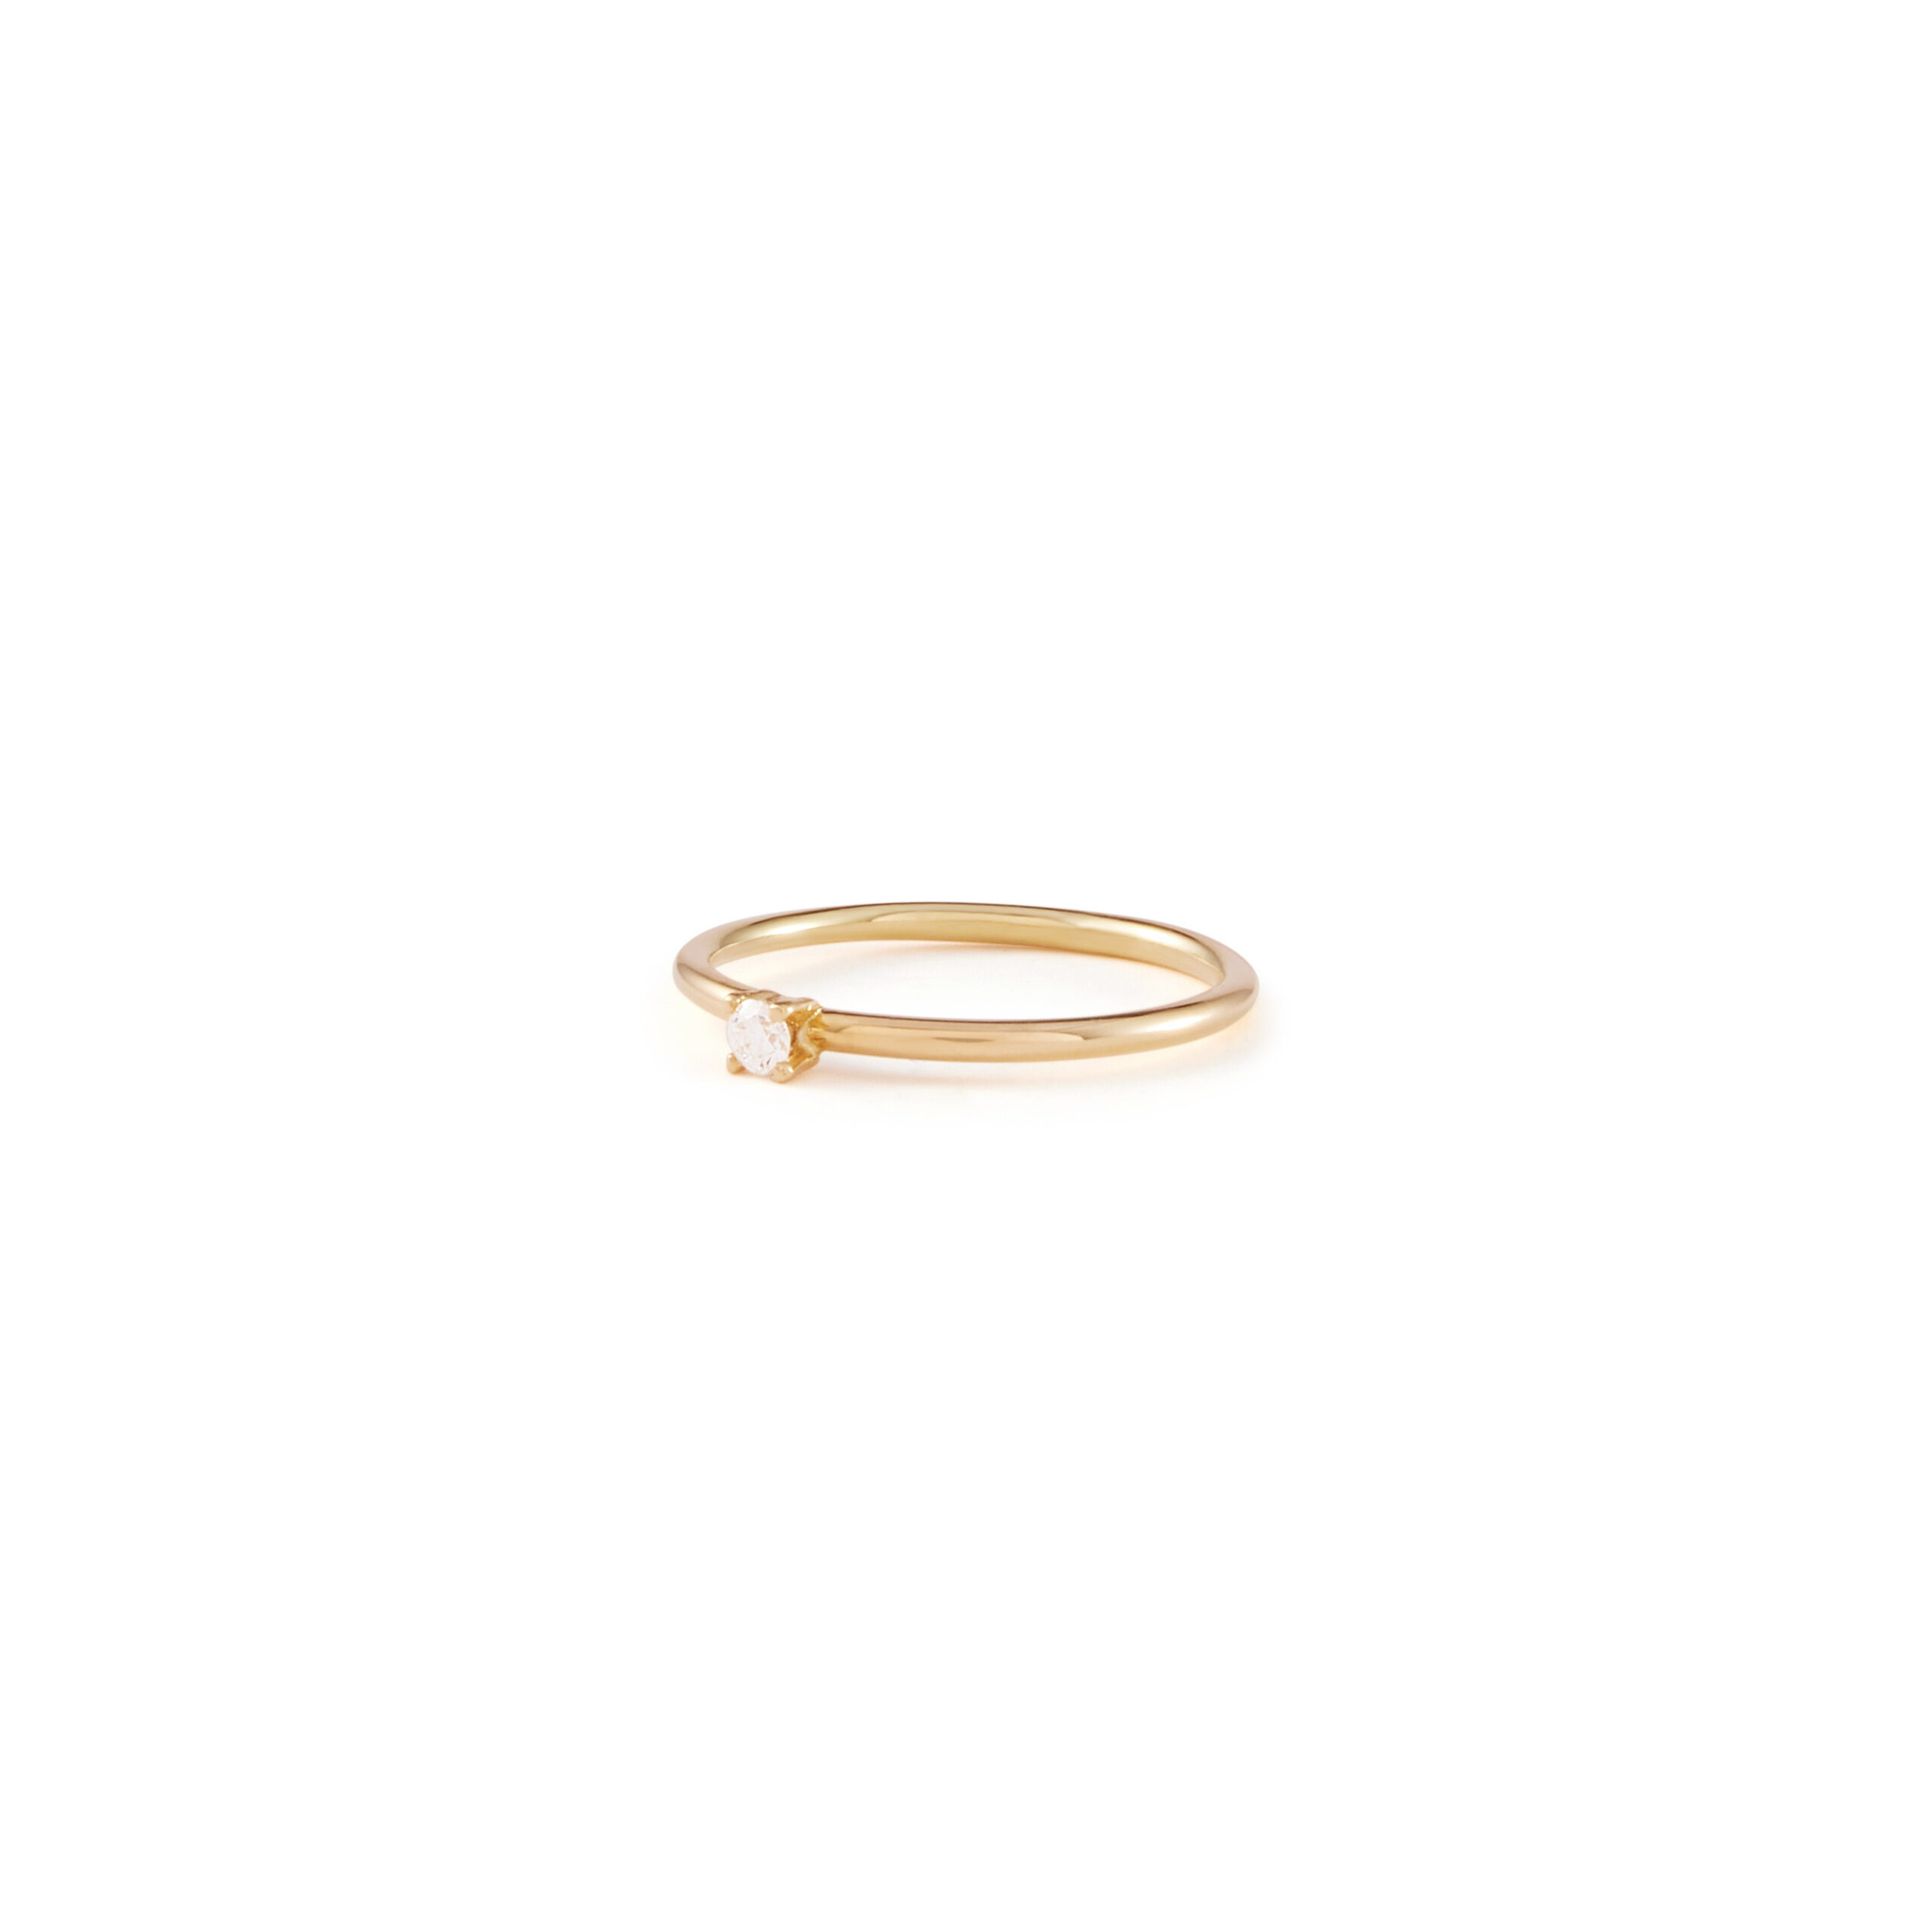 9ct Yellow Gold and Claw Set Diamond Band. - Lind Jewellery Design